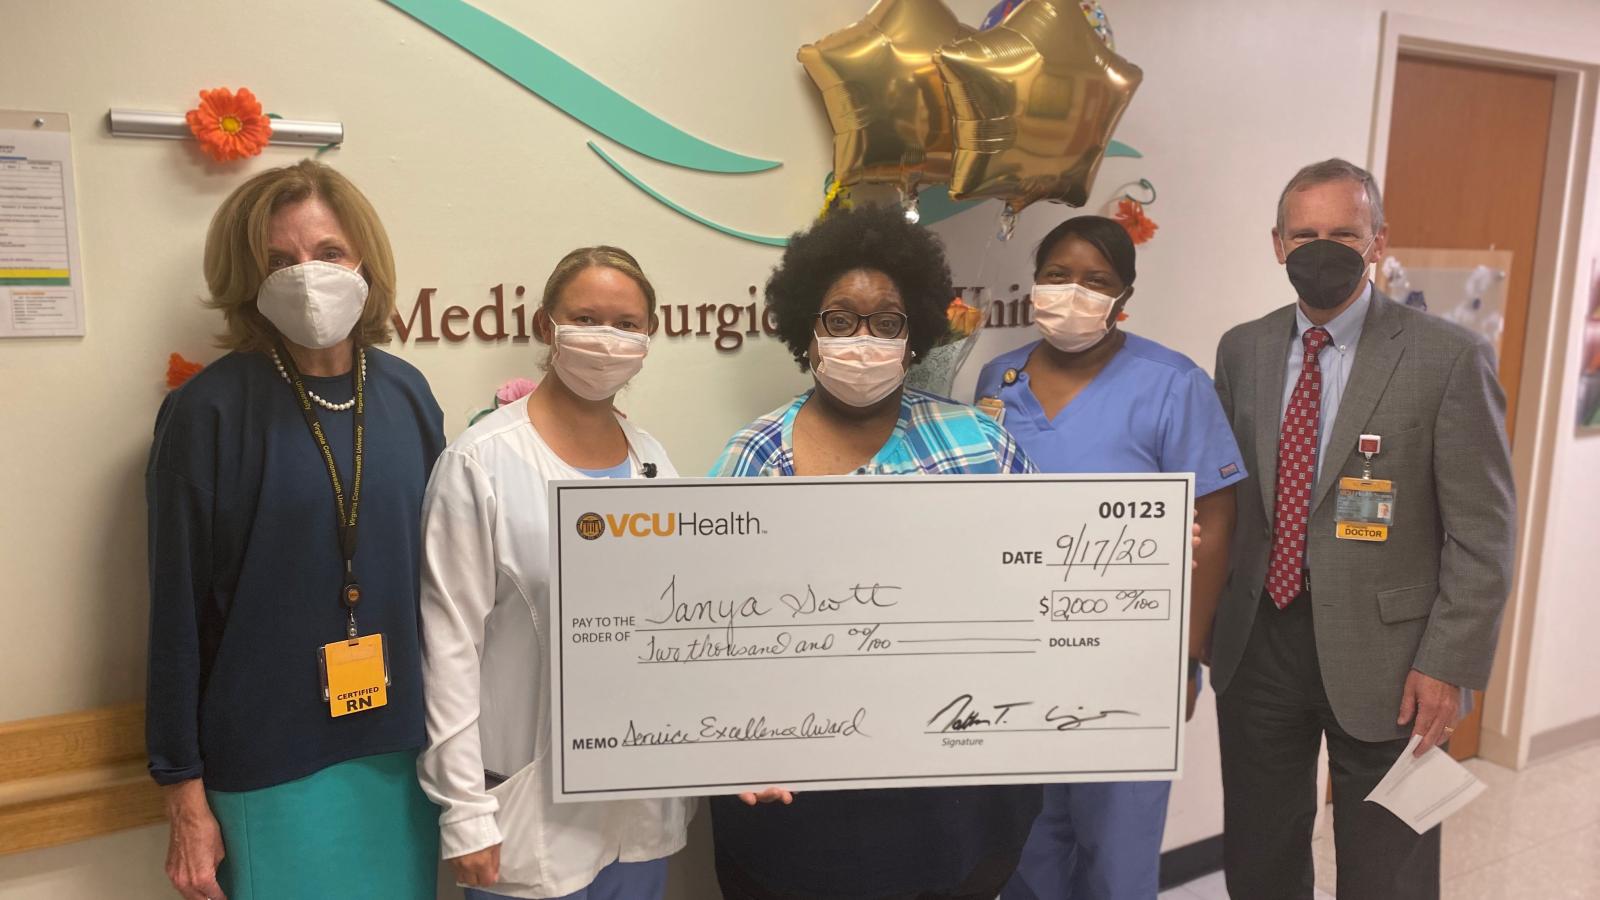 (L to R) Deborah Zimmermann, D.N.P, former chief nursing officer and vice president of patient care services; Nina Carter, nurse manager; Tanya Scott, nurse clinician and 2020 Service Excellence Award recipient; Tashika Nixon, nurse clinician; and Ron Clark, M.D., interim Chief Executive Officer, VCU Hospitals and Clinics, gather to celebrate Tanya’s achievements and contributions to VCU Health. Photo courtesy of VCU Health